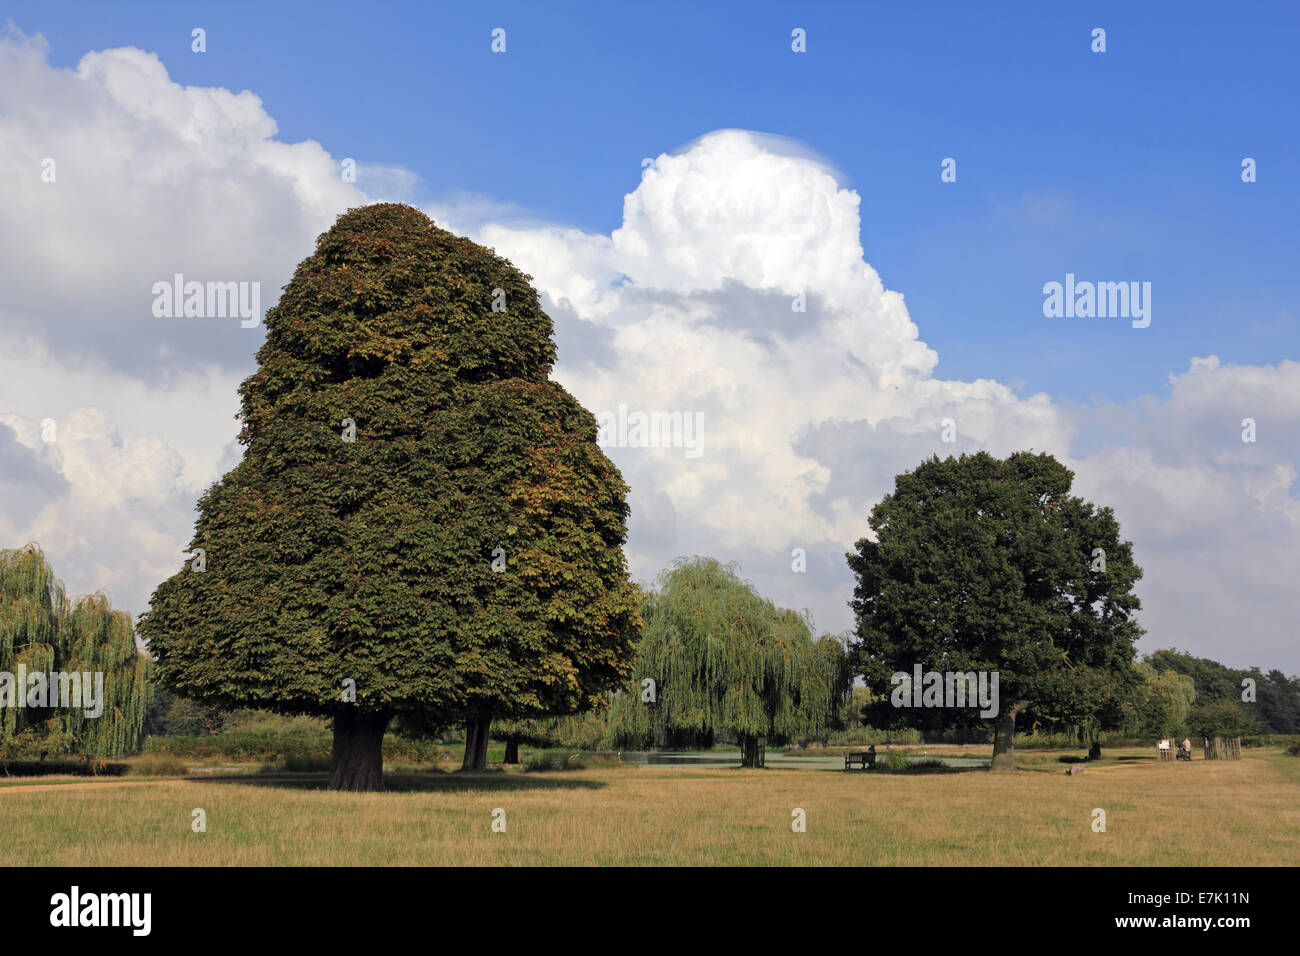 Bushy Park, SW London, England, UK. 19th September 2014. Unusual cloud formation in the sky over South West London. A large cumulus cloud is capped with a small wispy pileus cloud against a vivid blue sky. Credit:  Julia Gavin UK/Alamy Live News Stock Photo